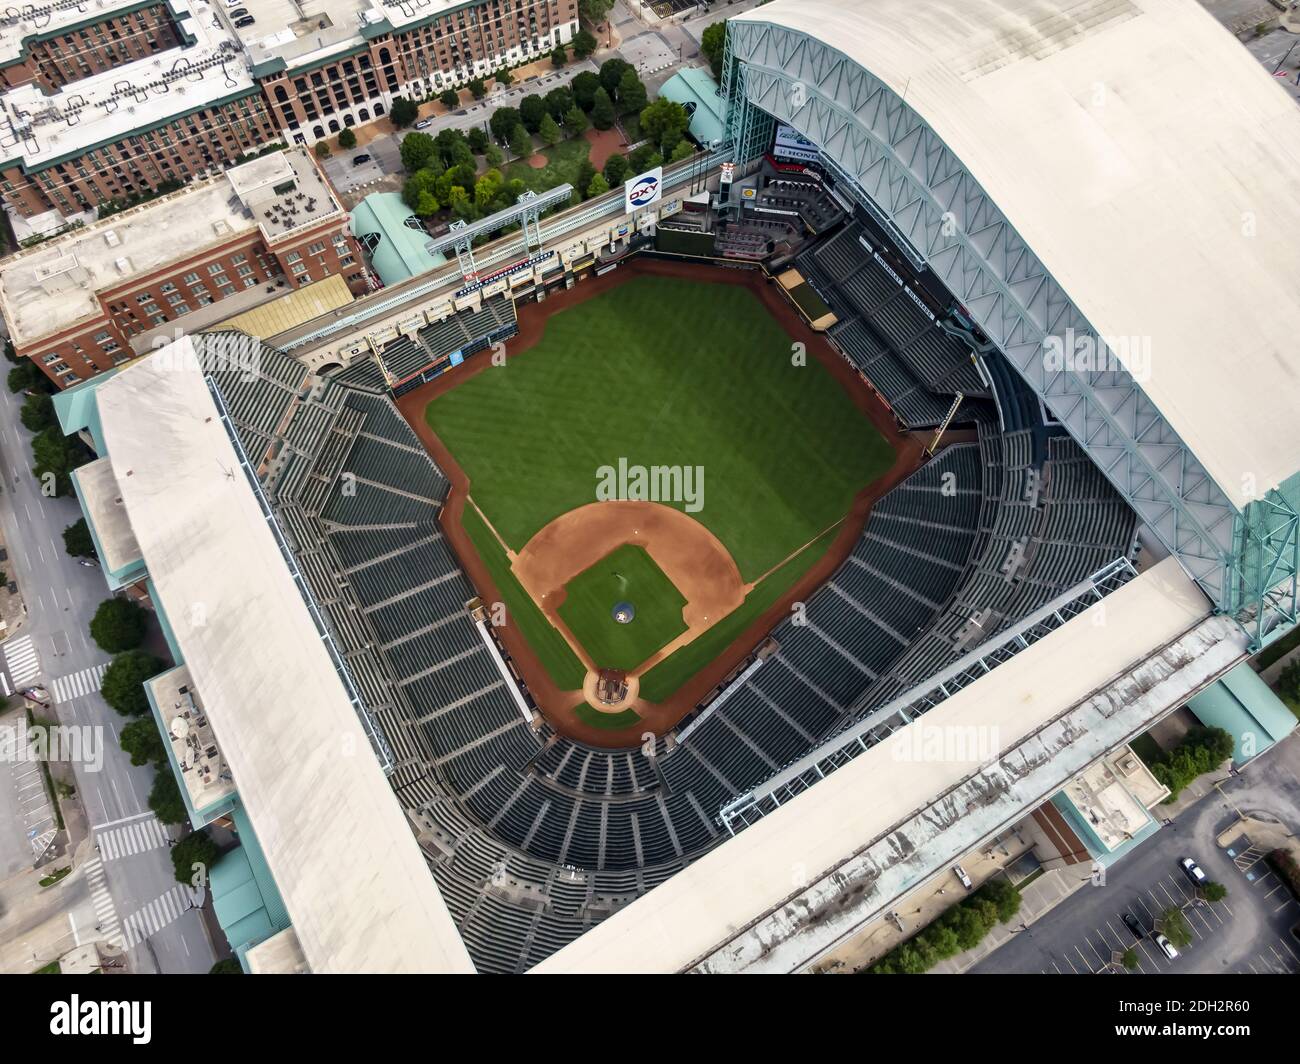 Minute Maid Park roof open or closed: Houston's warm, dense air